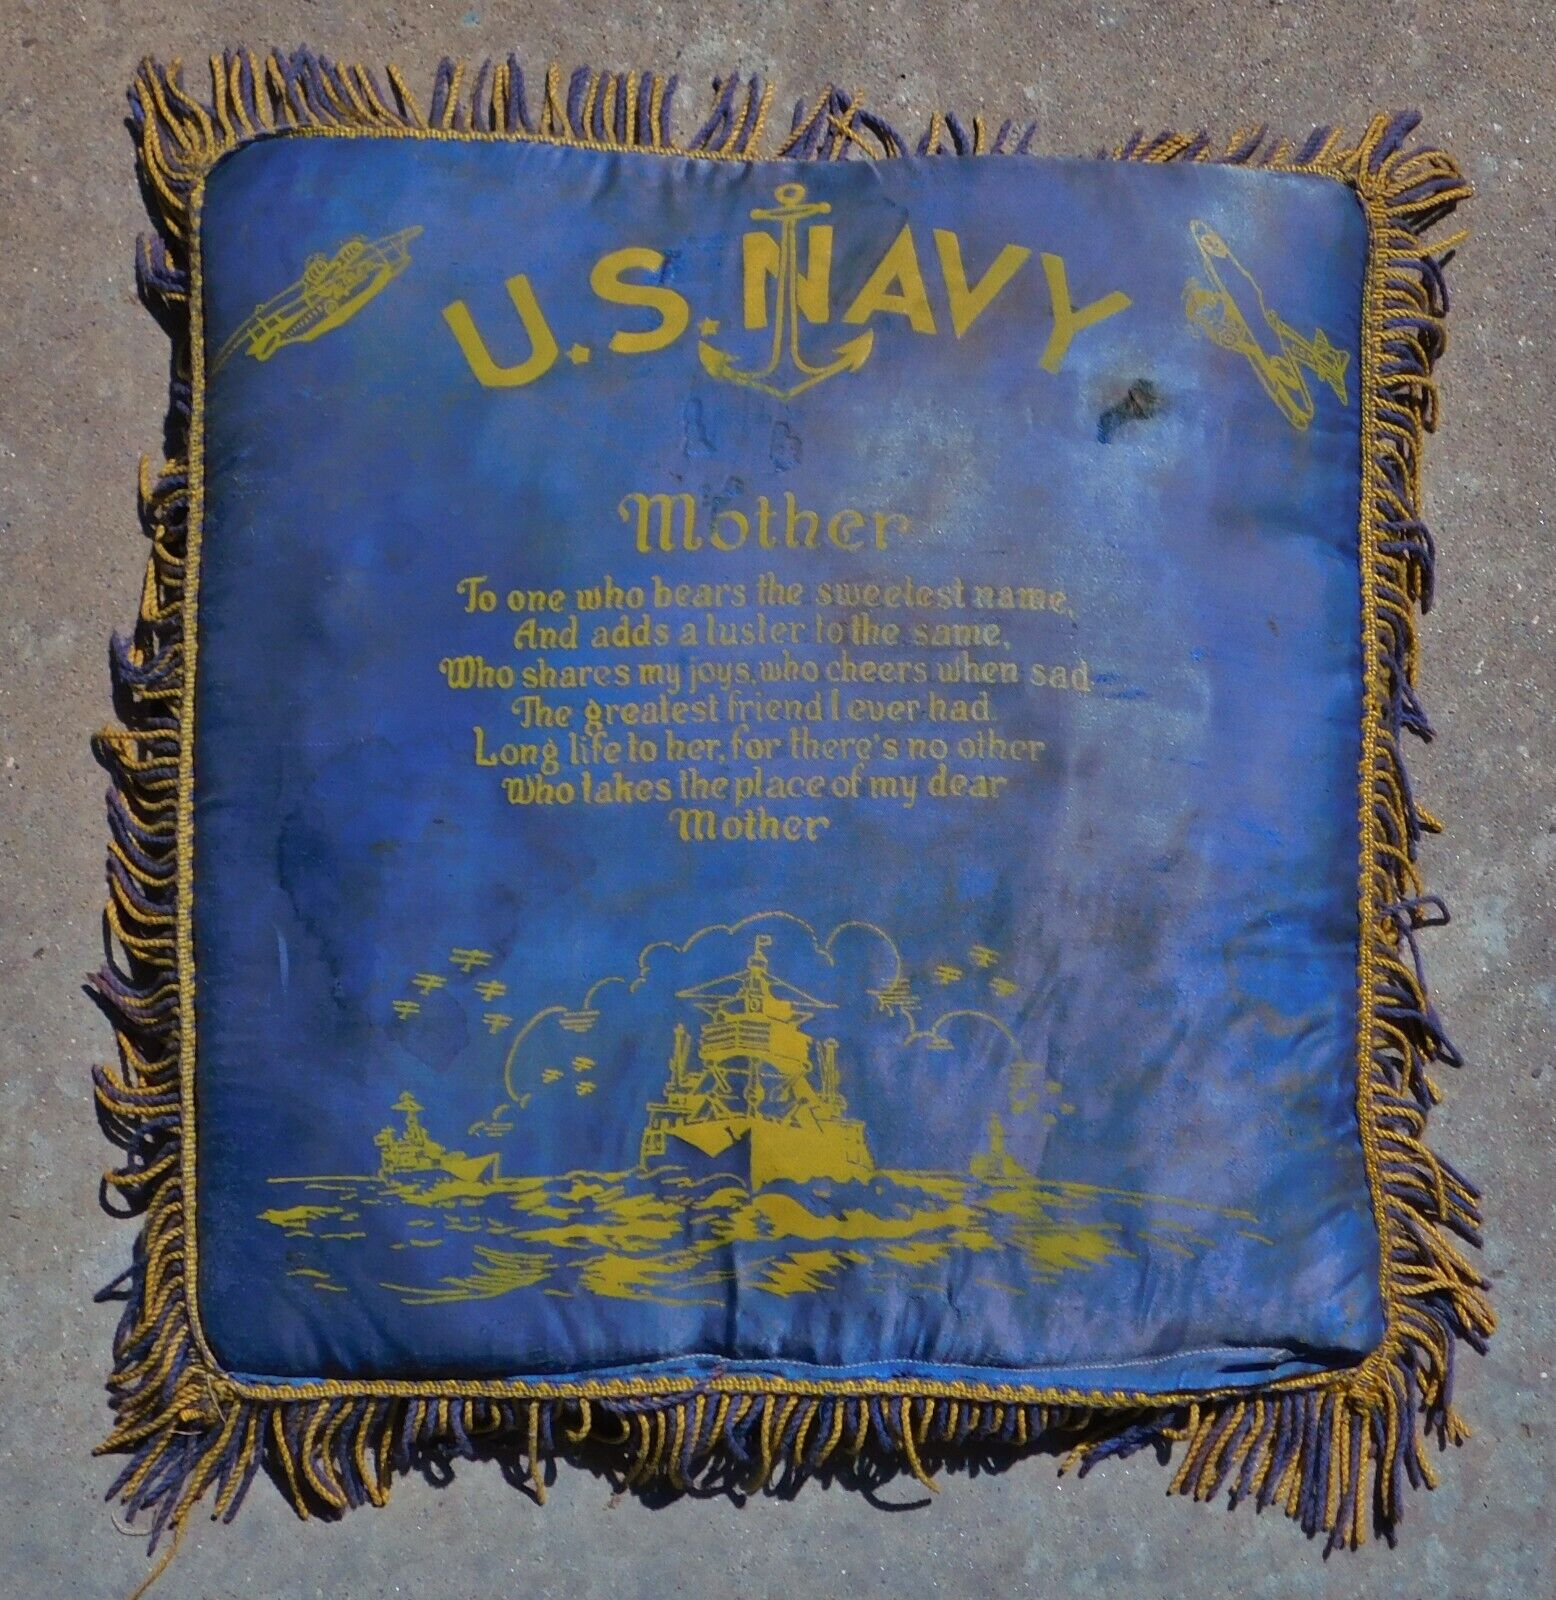 Vintage Interwar 1930s US NAVY Mother Pillow with Sikorsky JRS-1 and Grumman F3F